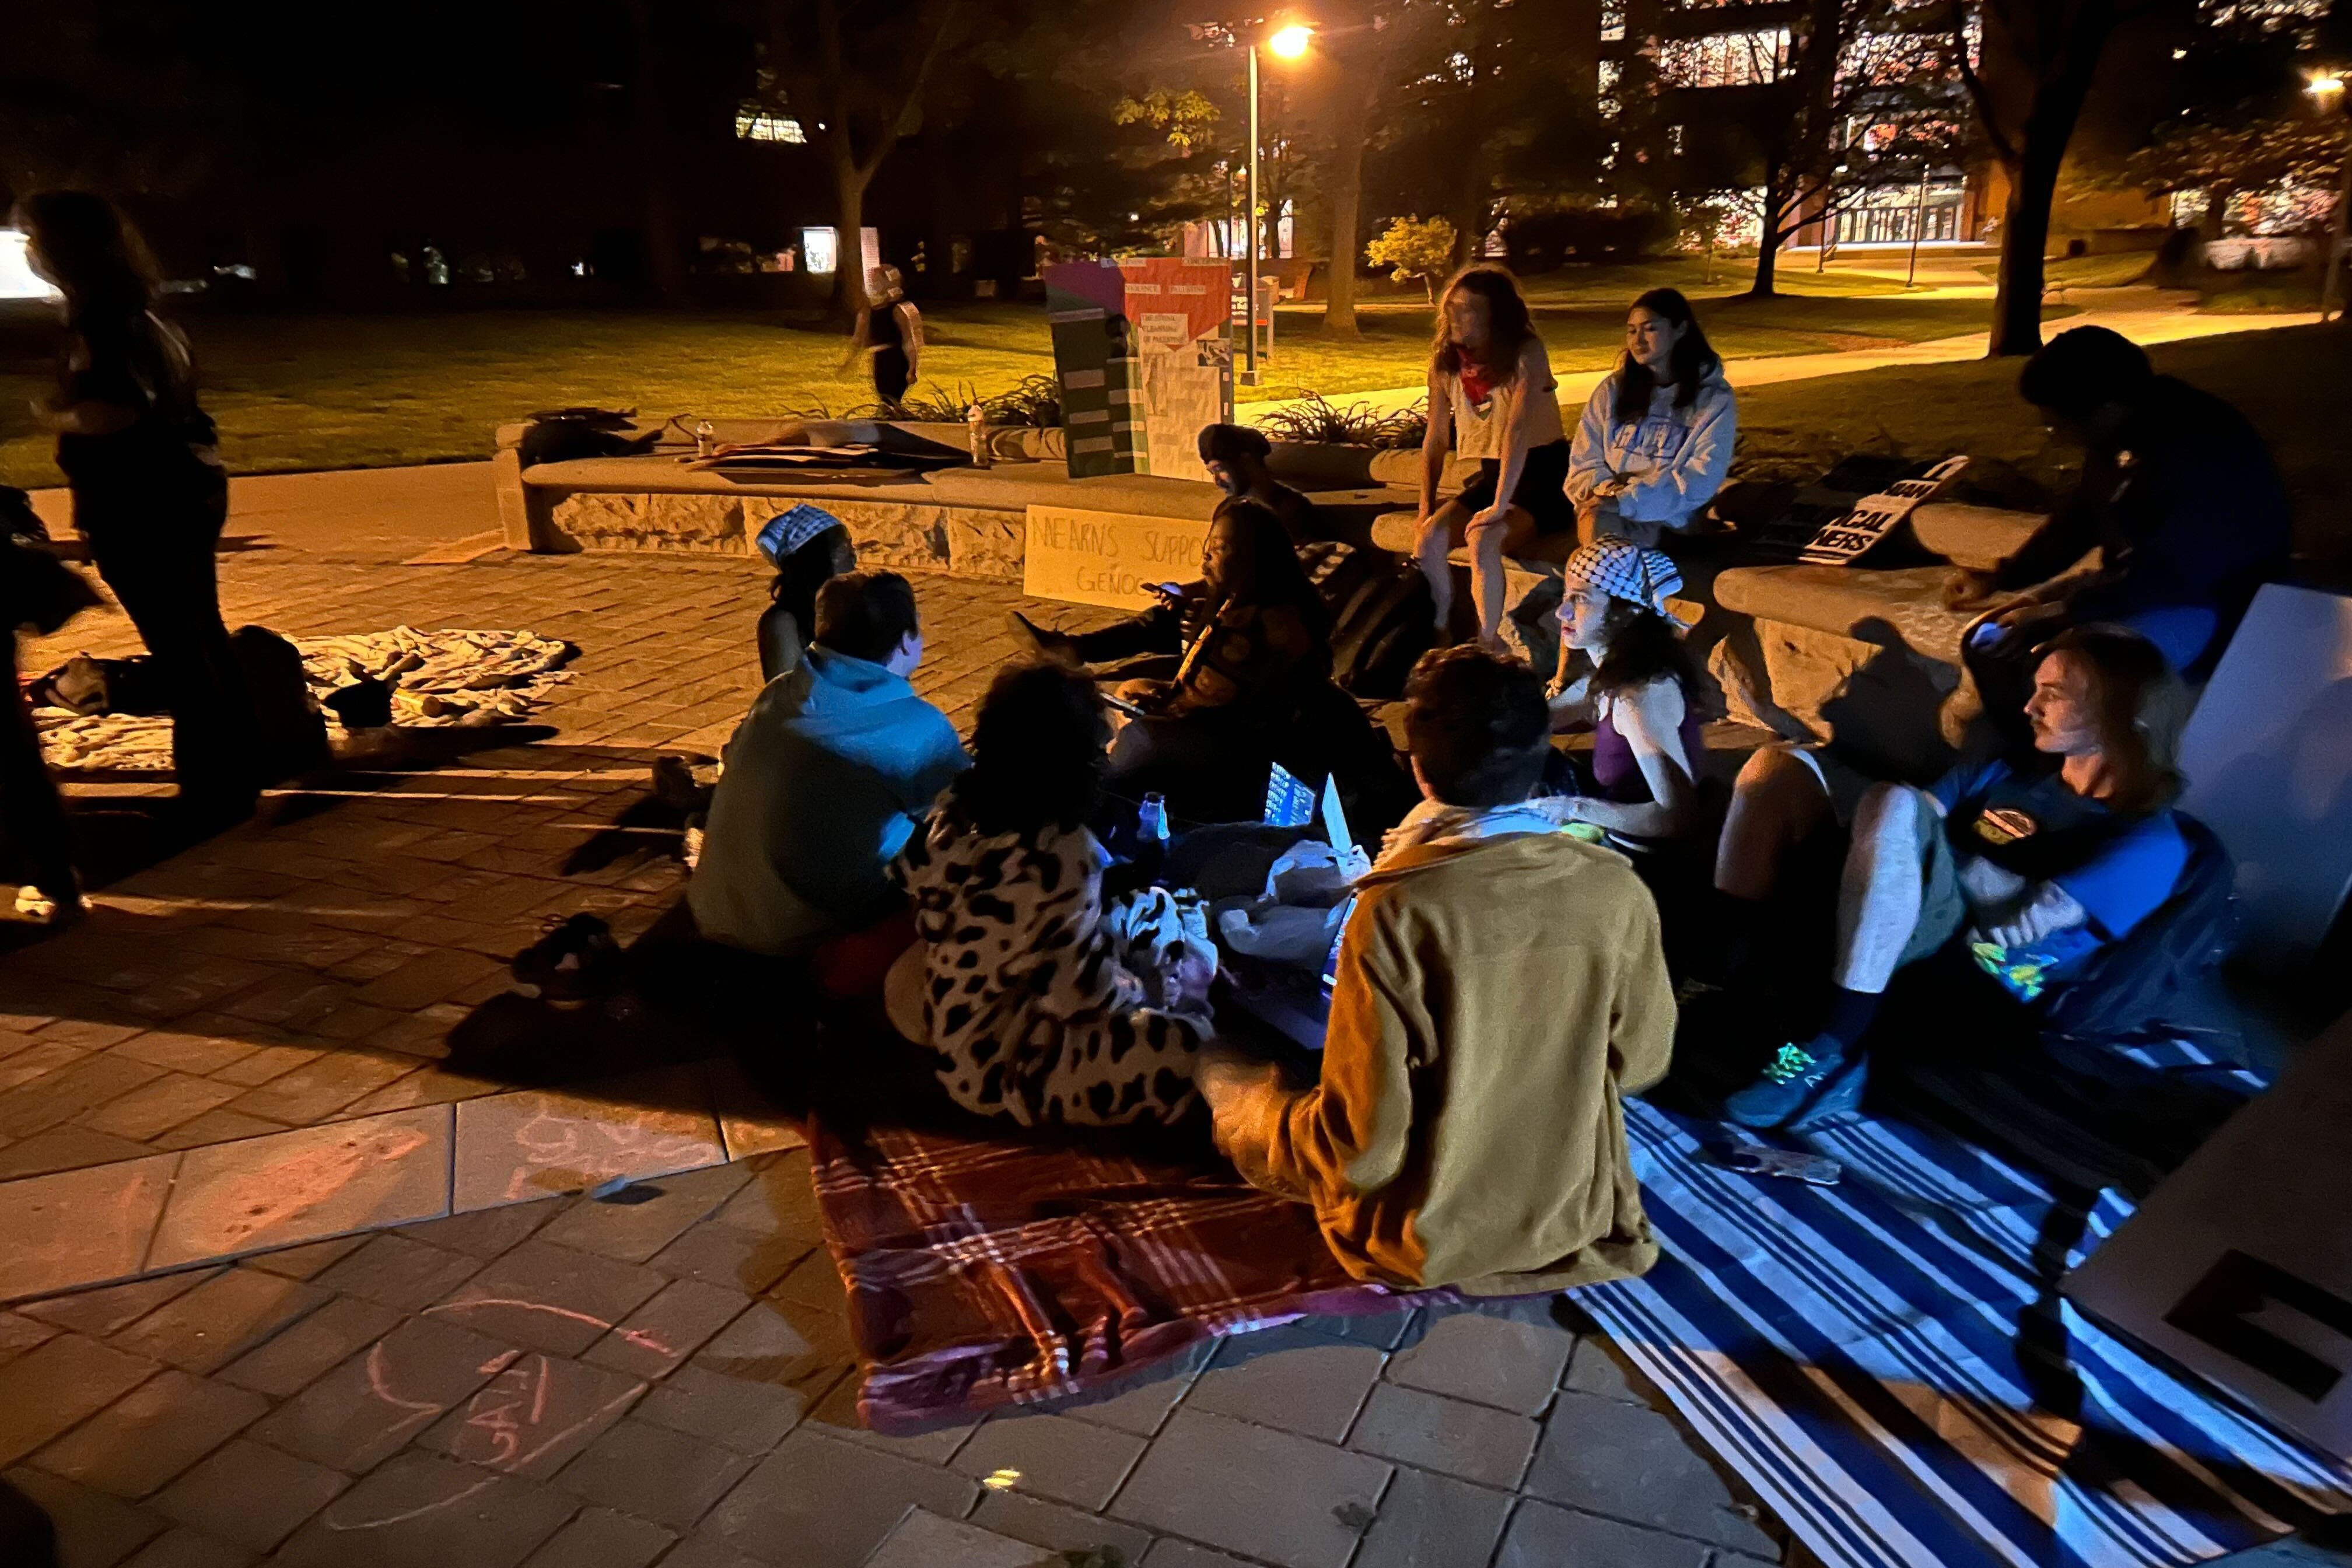 Students intend to stay all night to protest deaths in Gaza